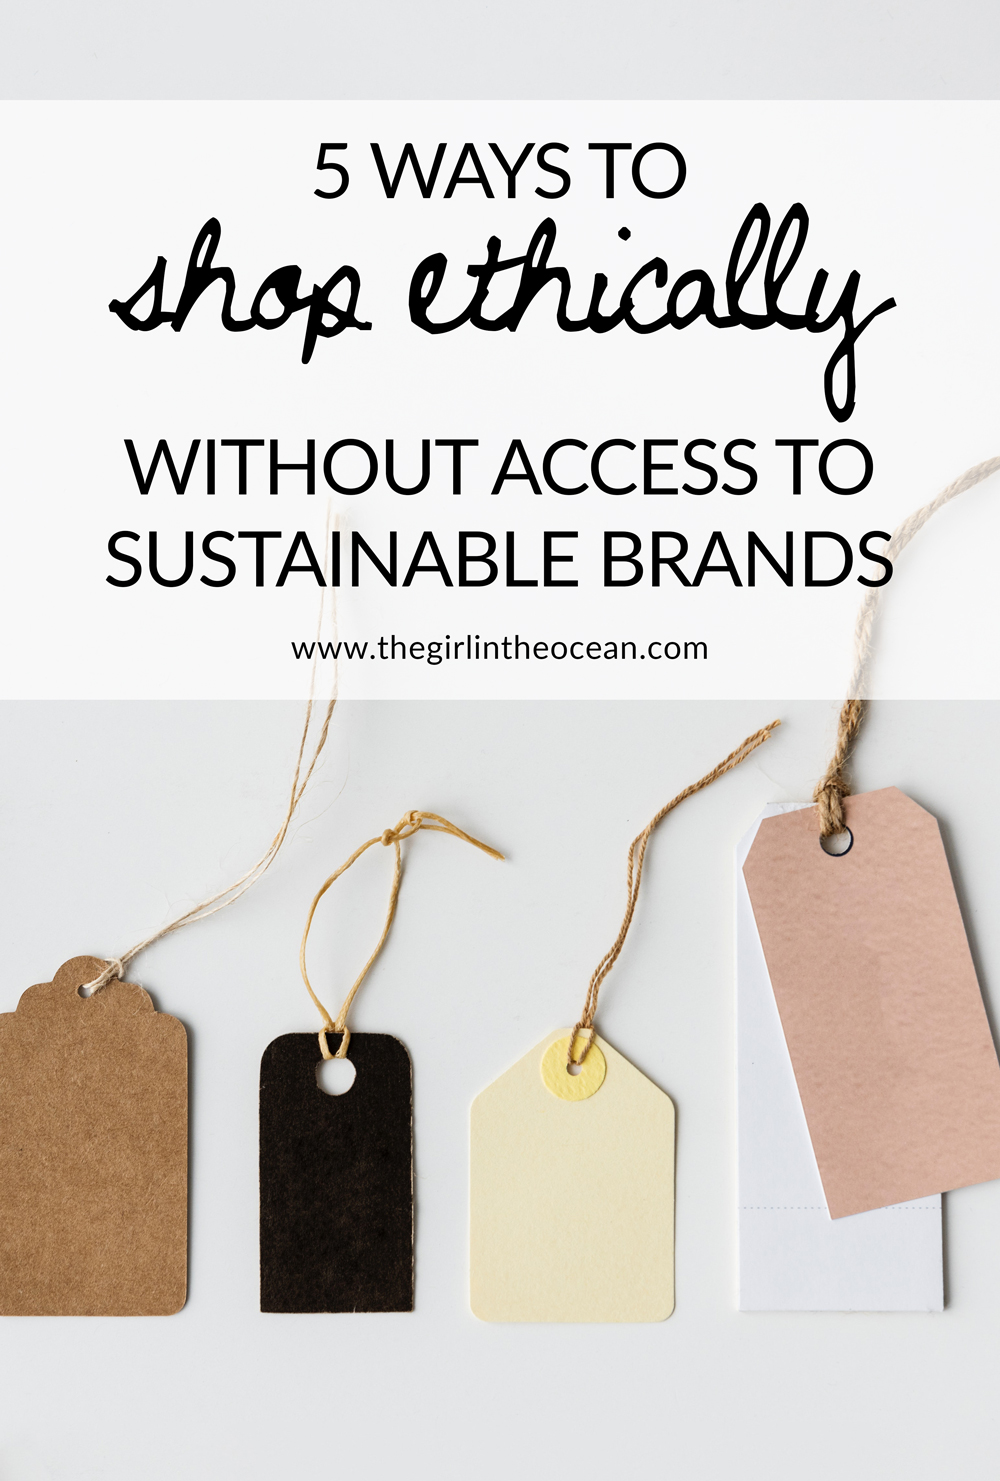 5 Ways to Shop Ethically Without Access to Sustainable Brands